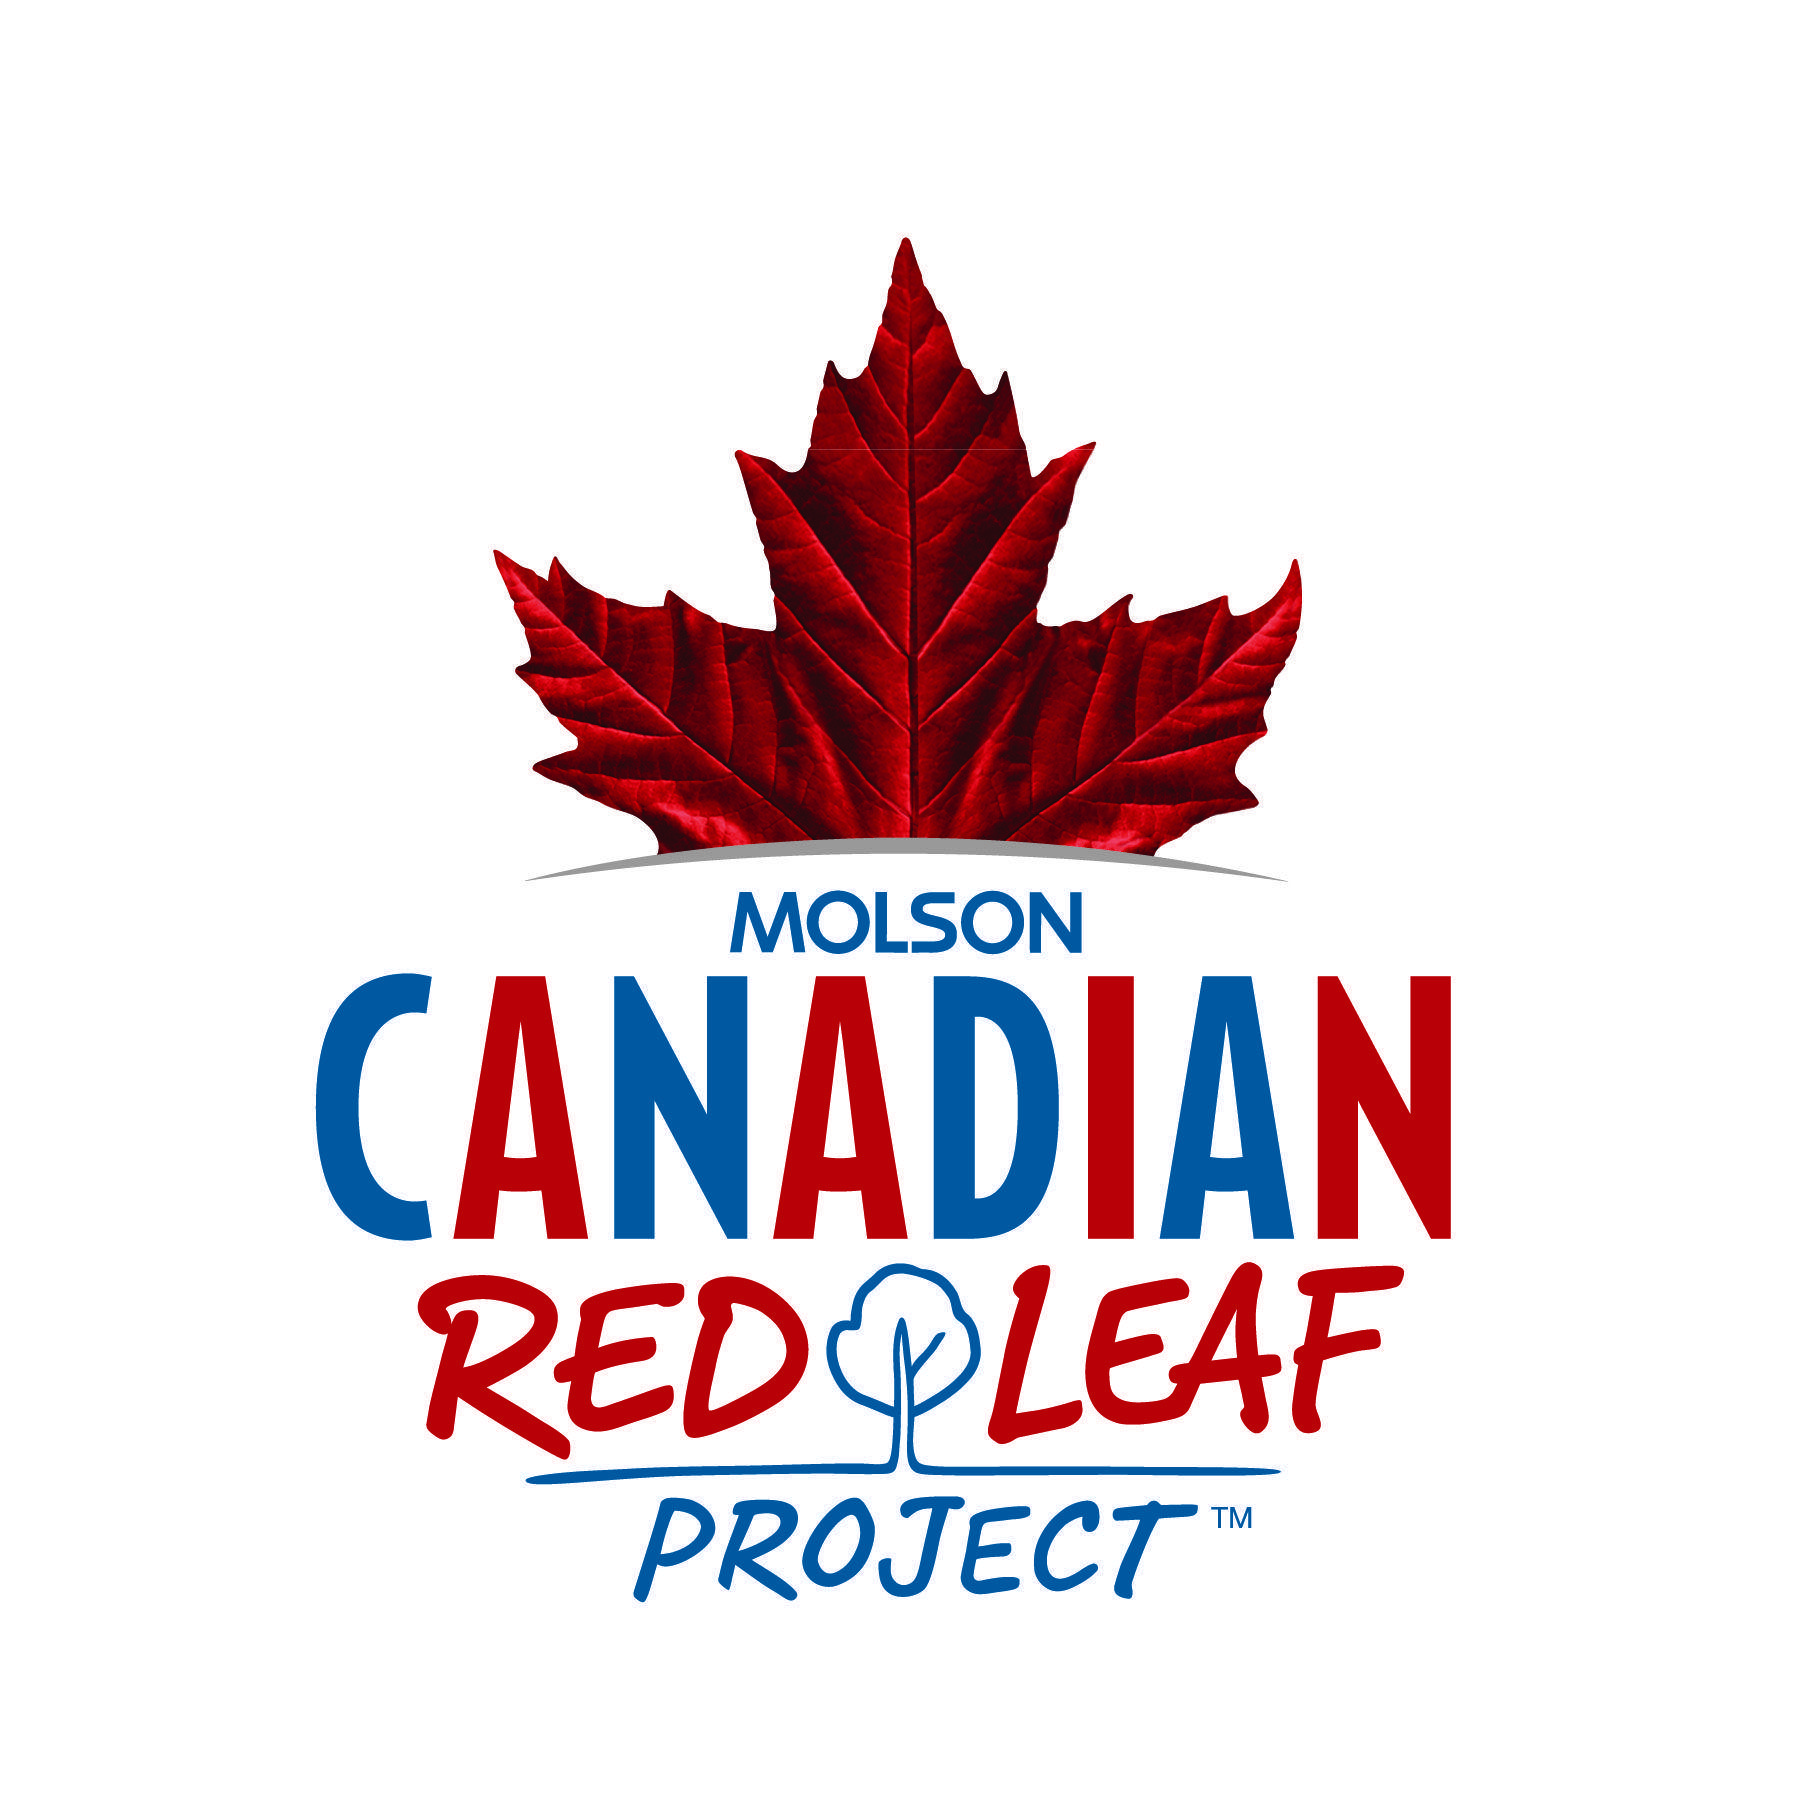 Red Canadian Leaf Logo - The Grass Just Got Greener: Molson Canadian Red Leaf Project Deepens